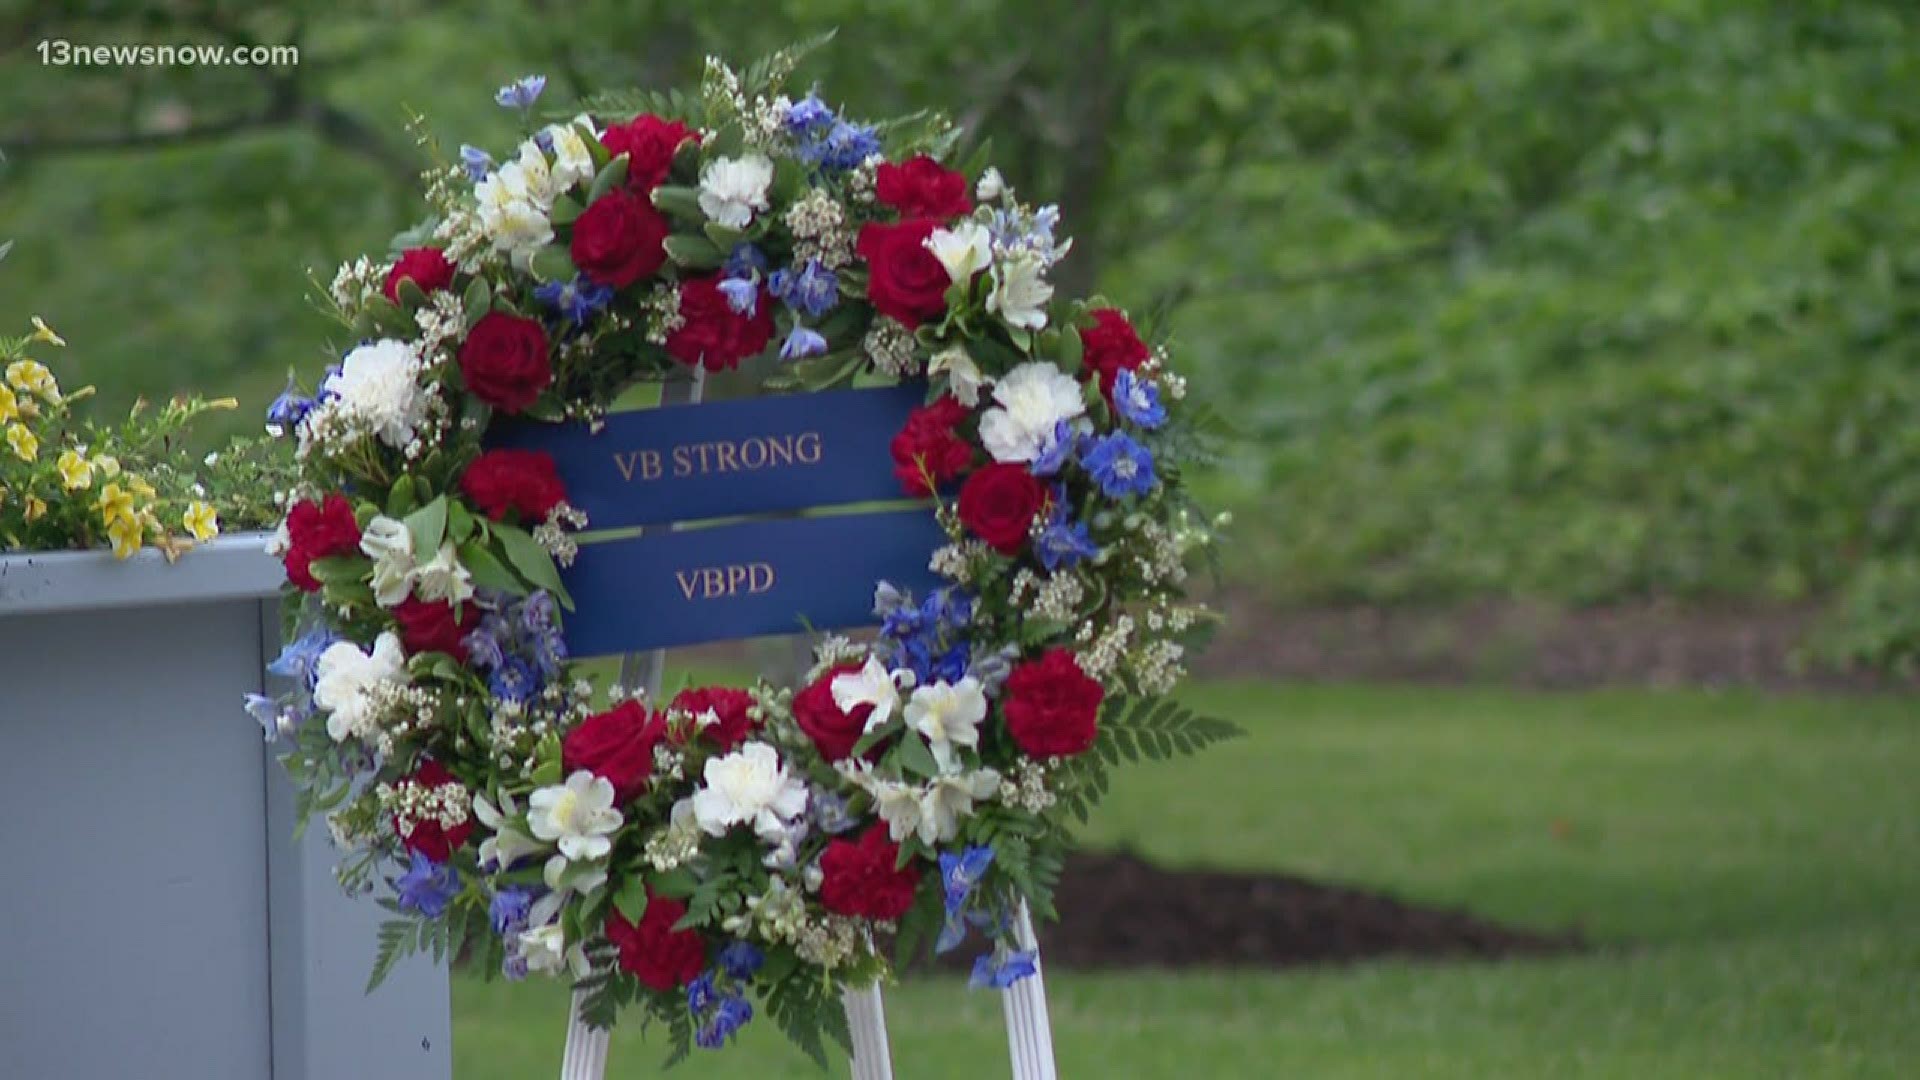 It's been nearly a year since 12 people were killed in a shooting at the Virginia Beach Municipal Center.